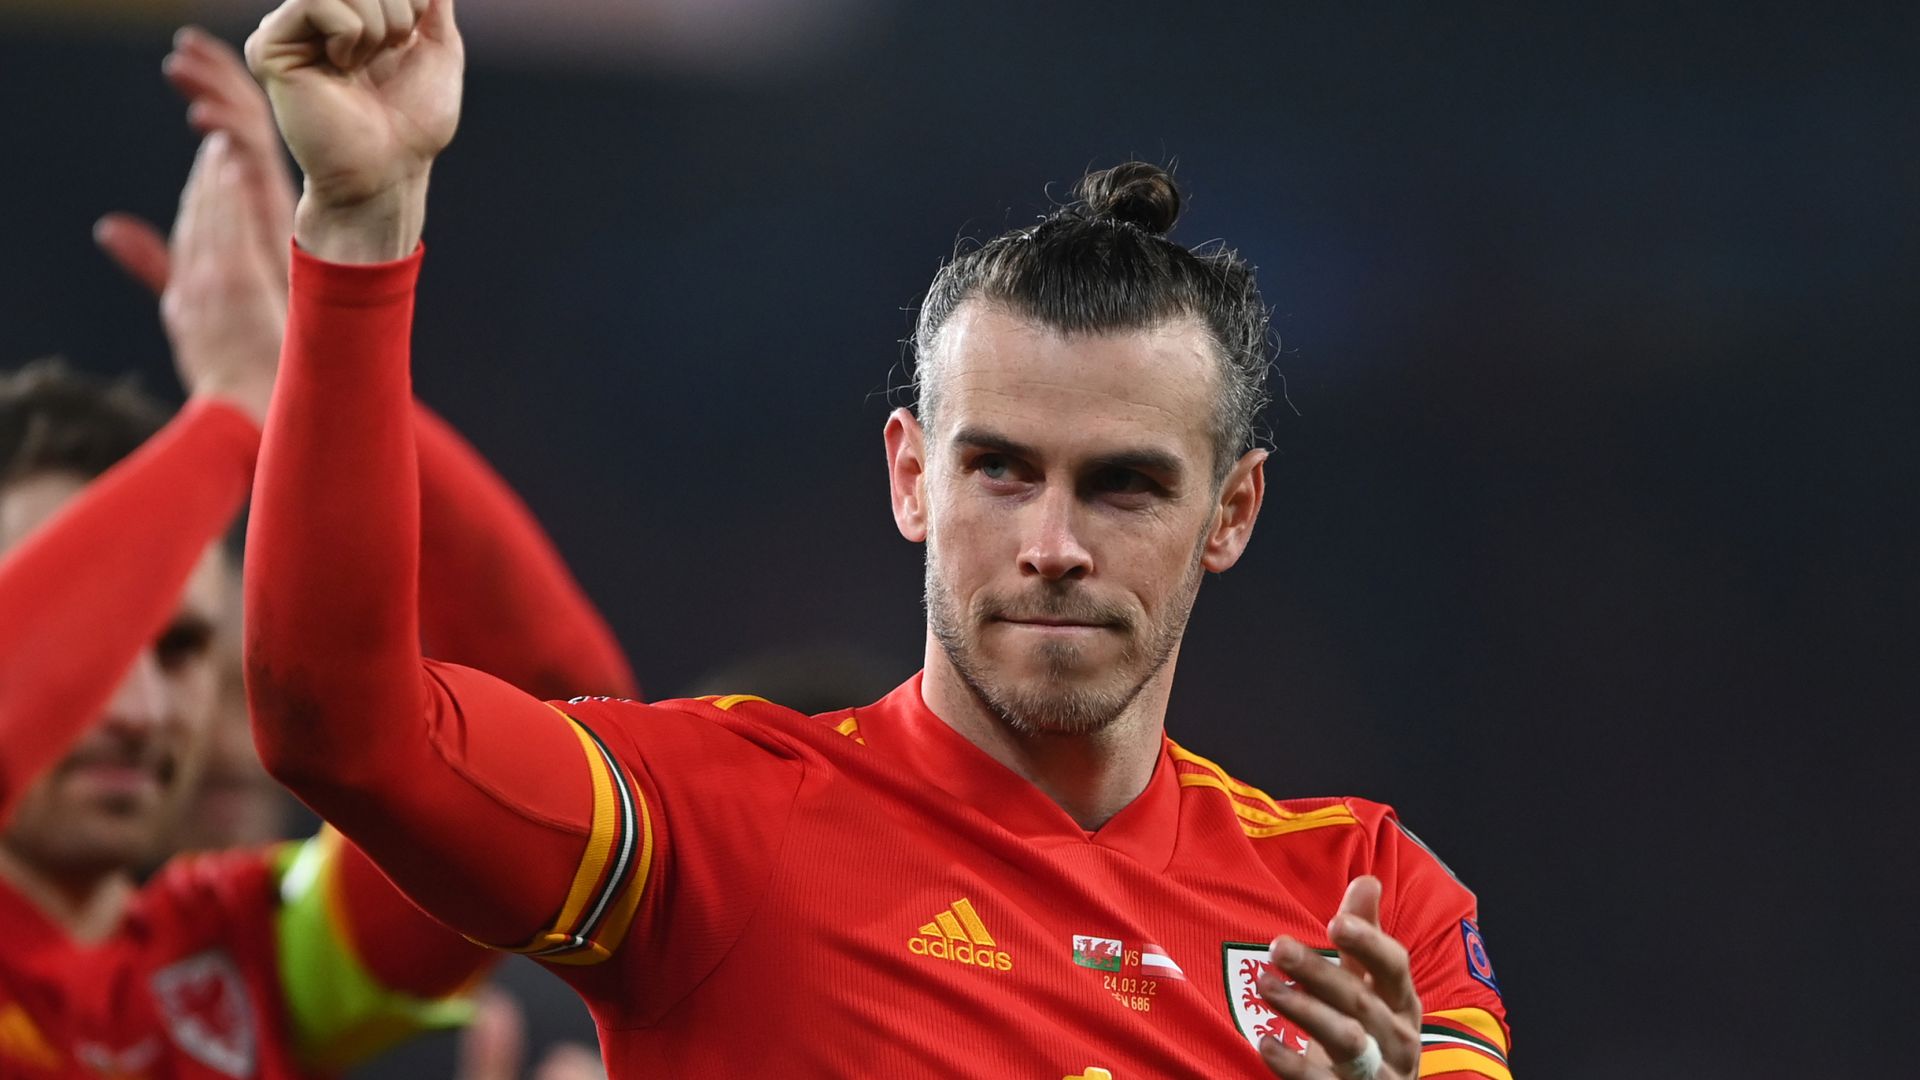 What's next for Gareth Bale?